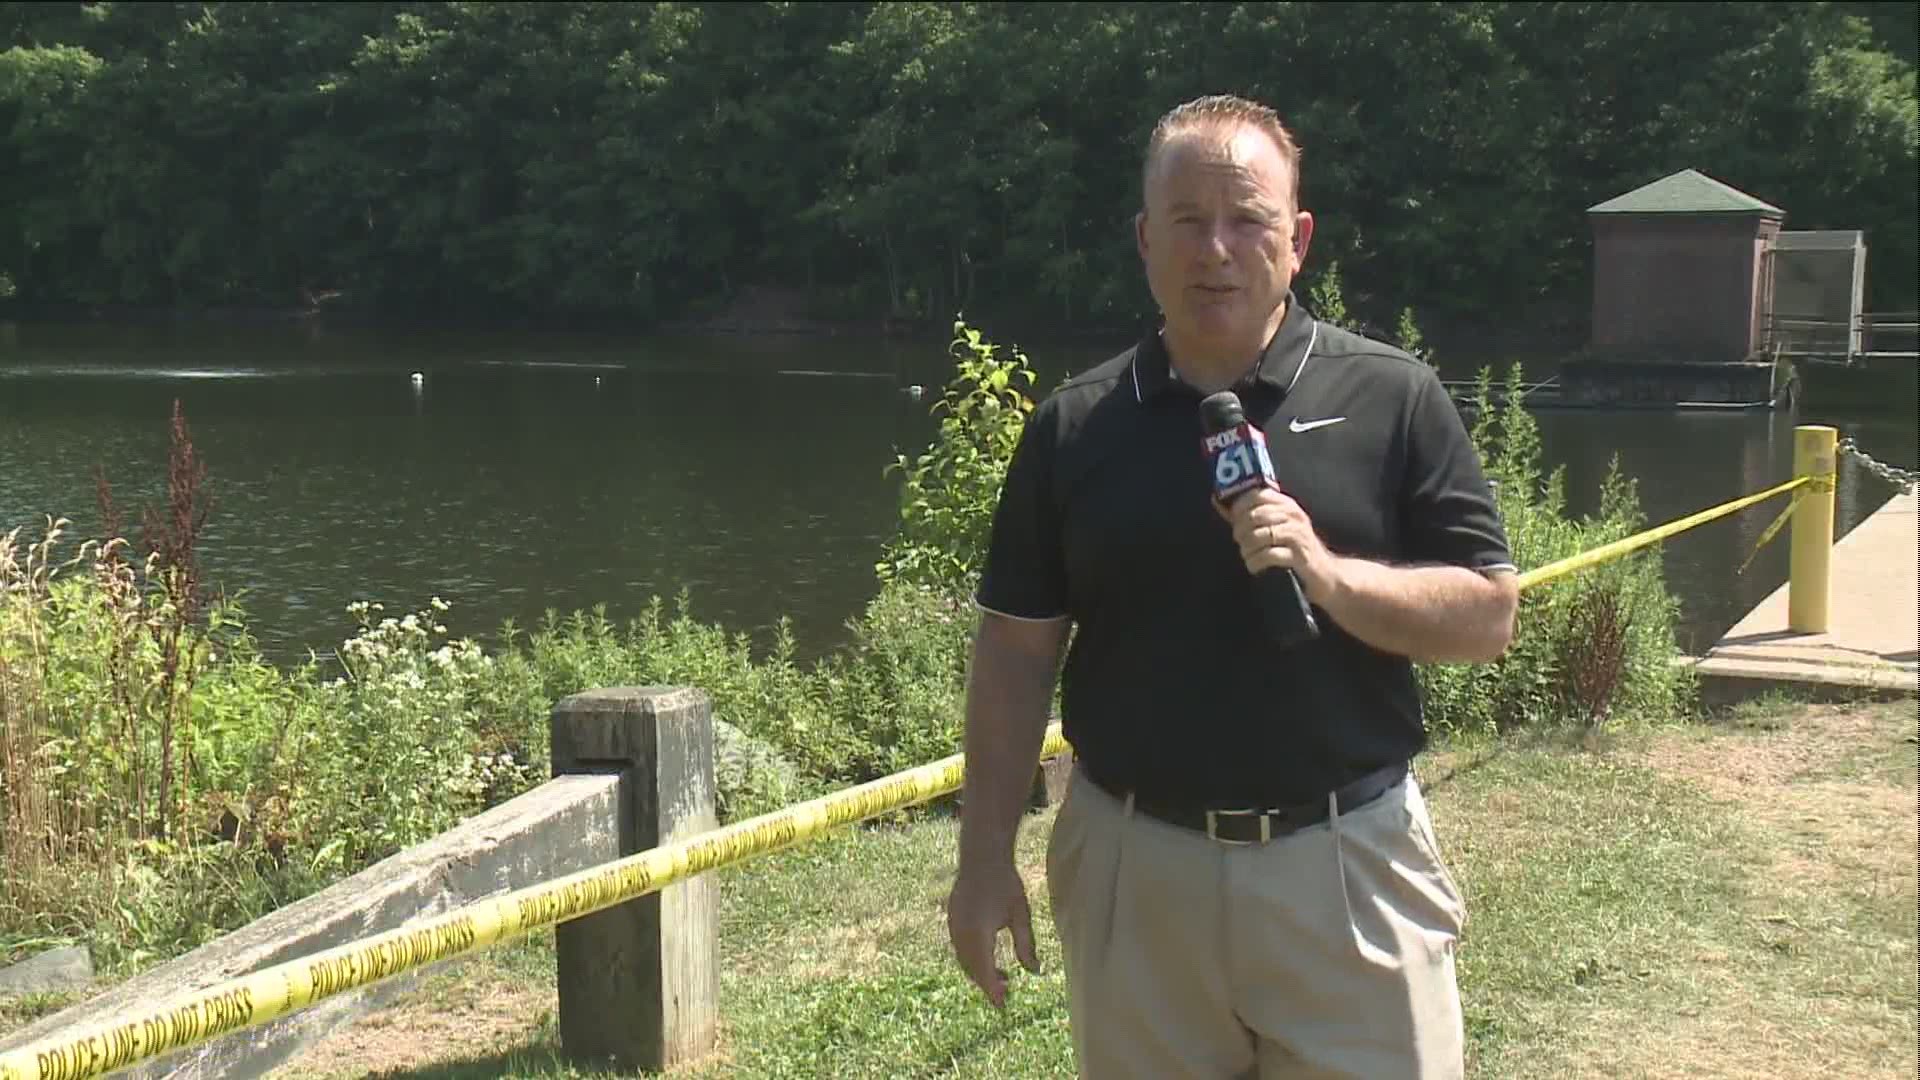 Police confirmed a body was found by water division crews